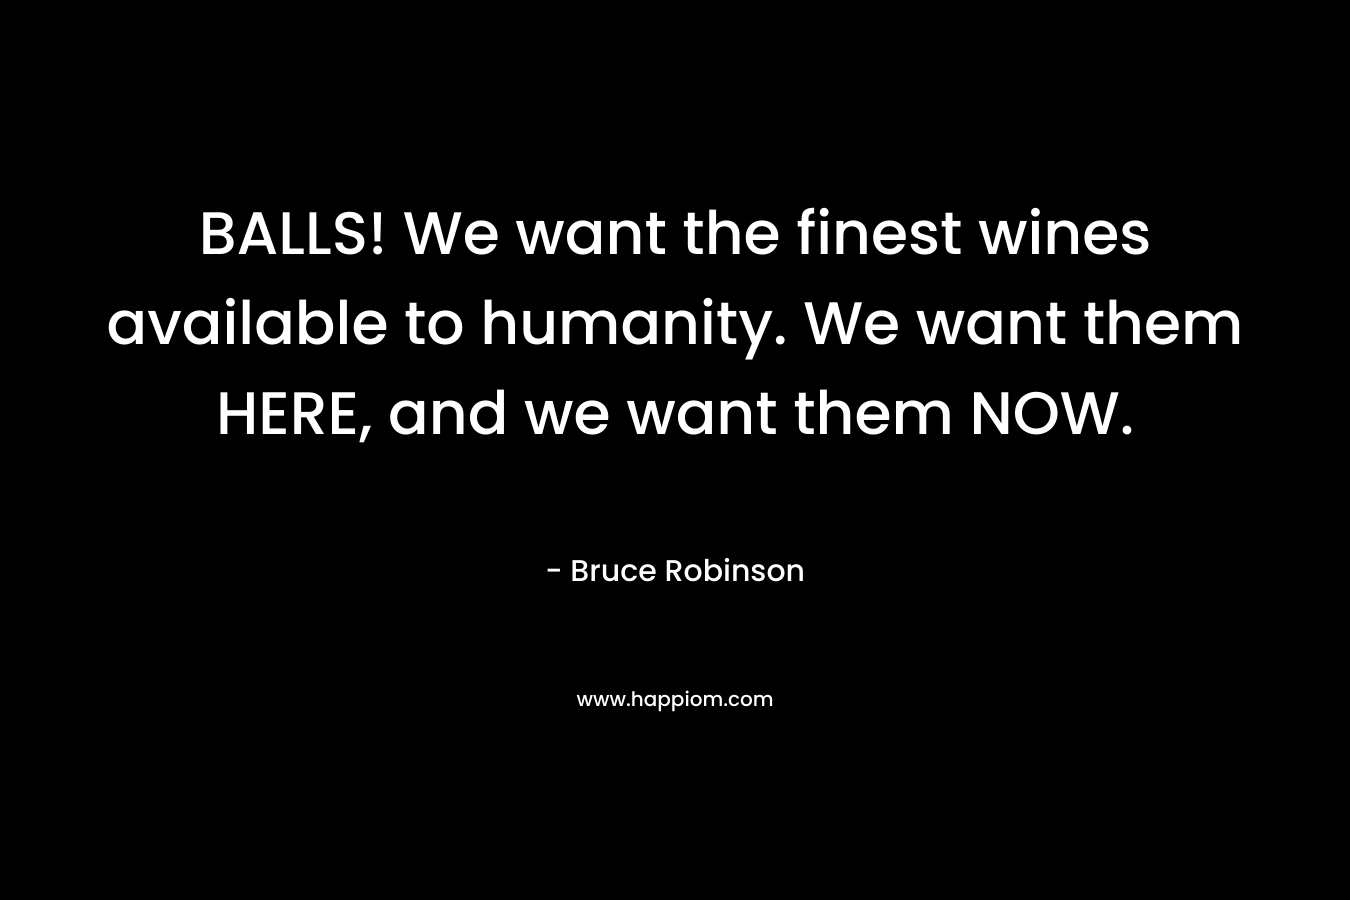 BALLS! We want the finest wines available to humanity. We want them HERE, and we want them NOW.